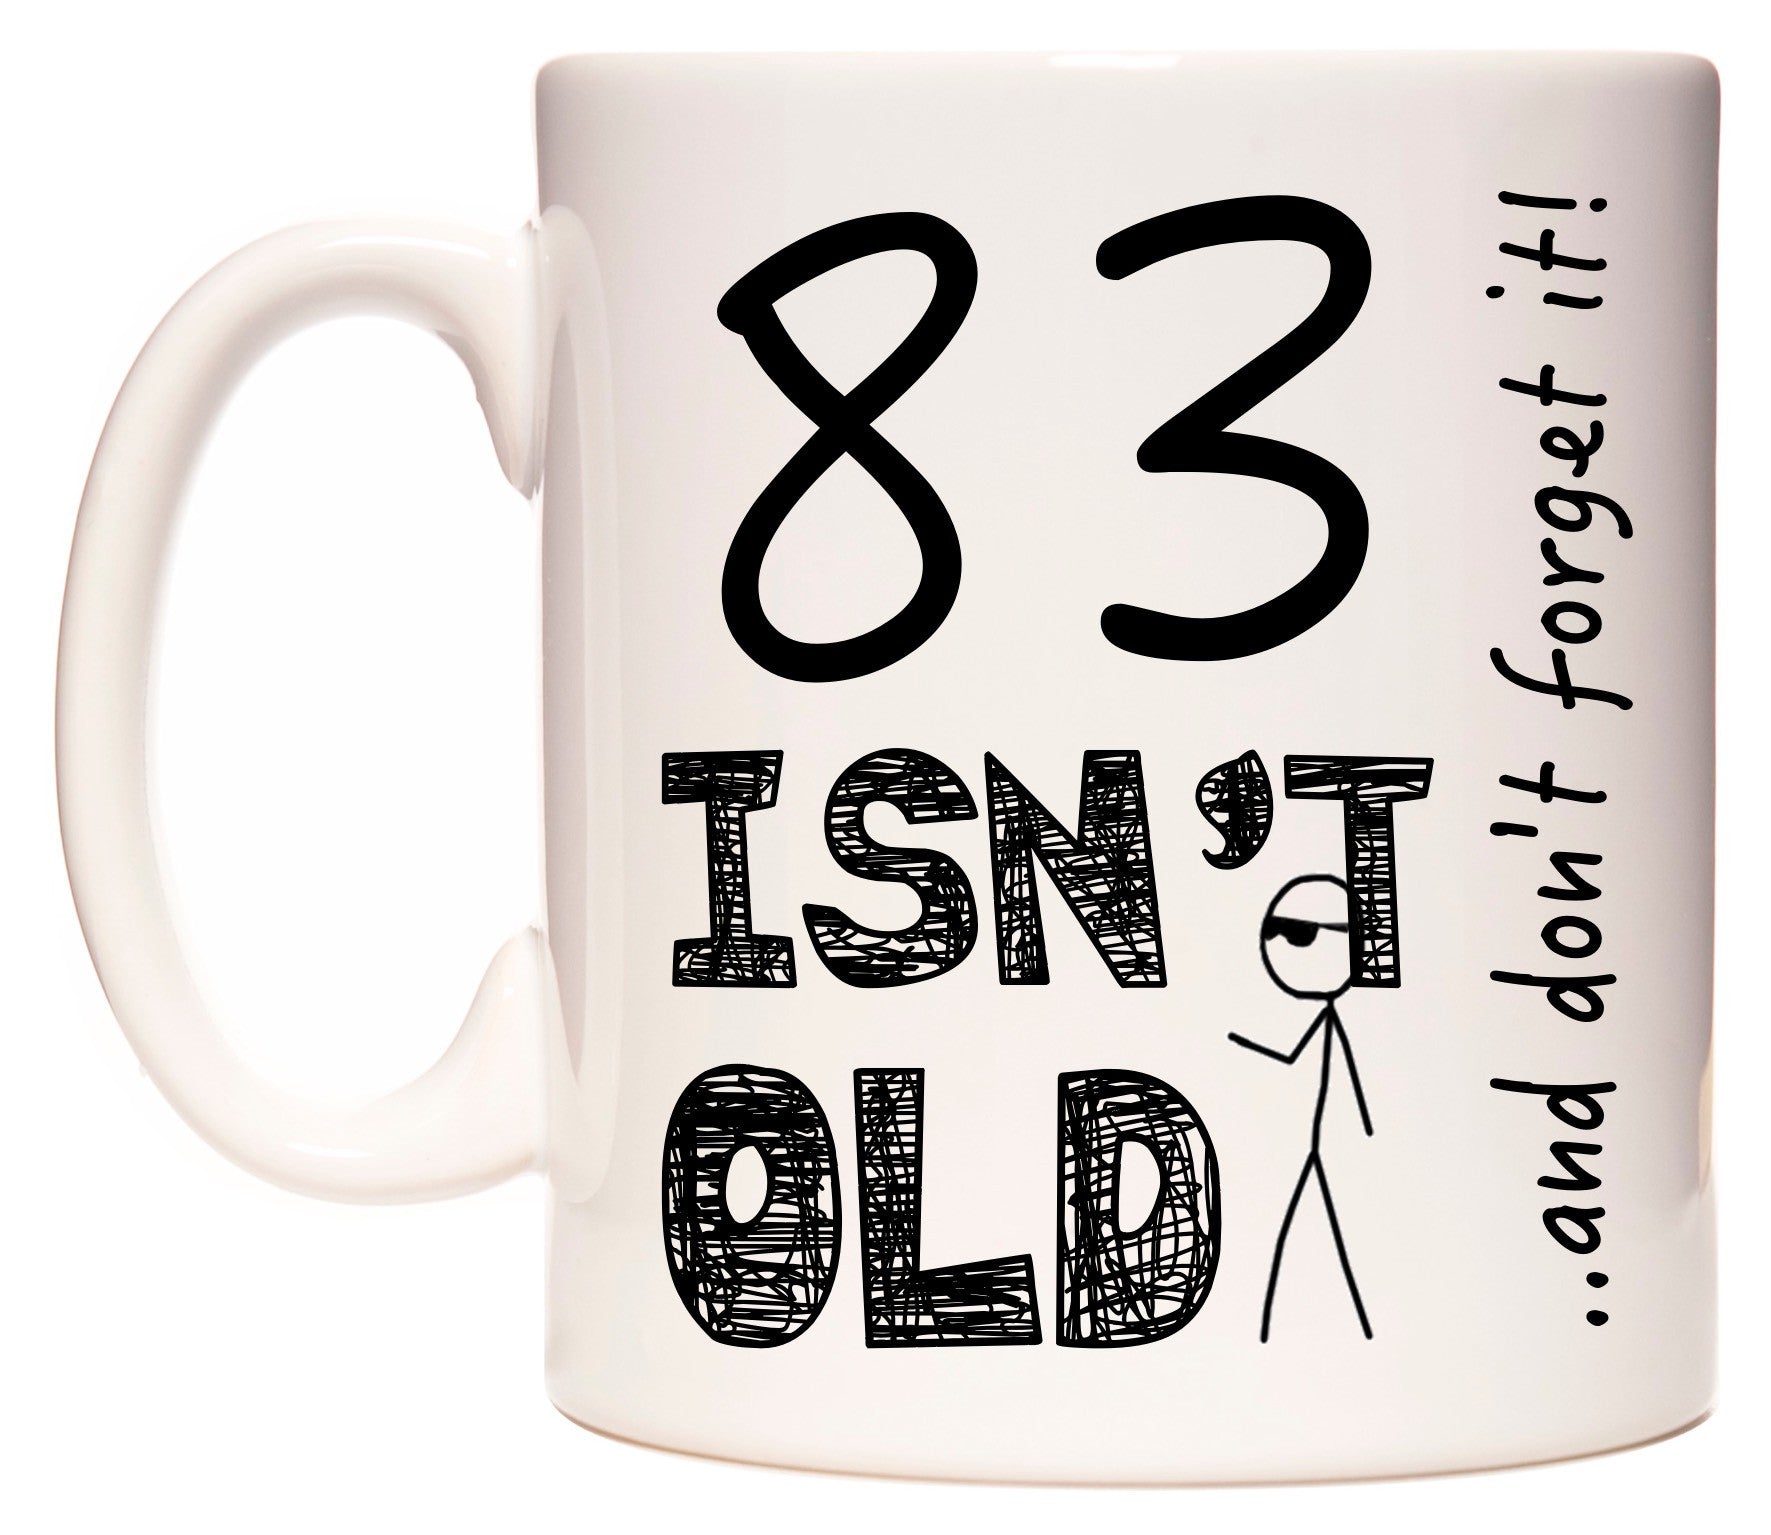 This mug features 83 Isn't Old